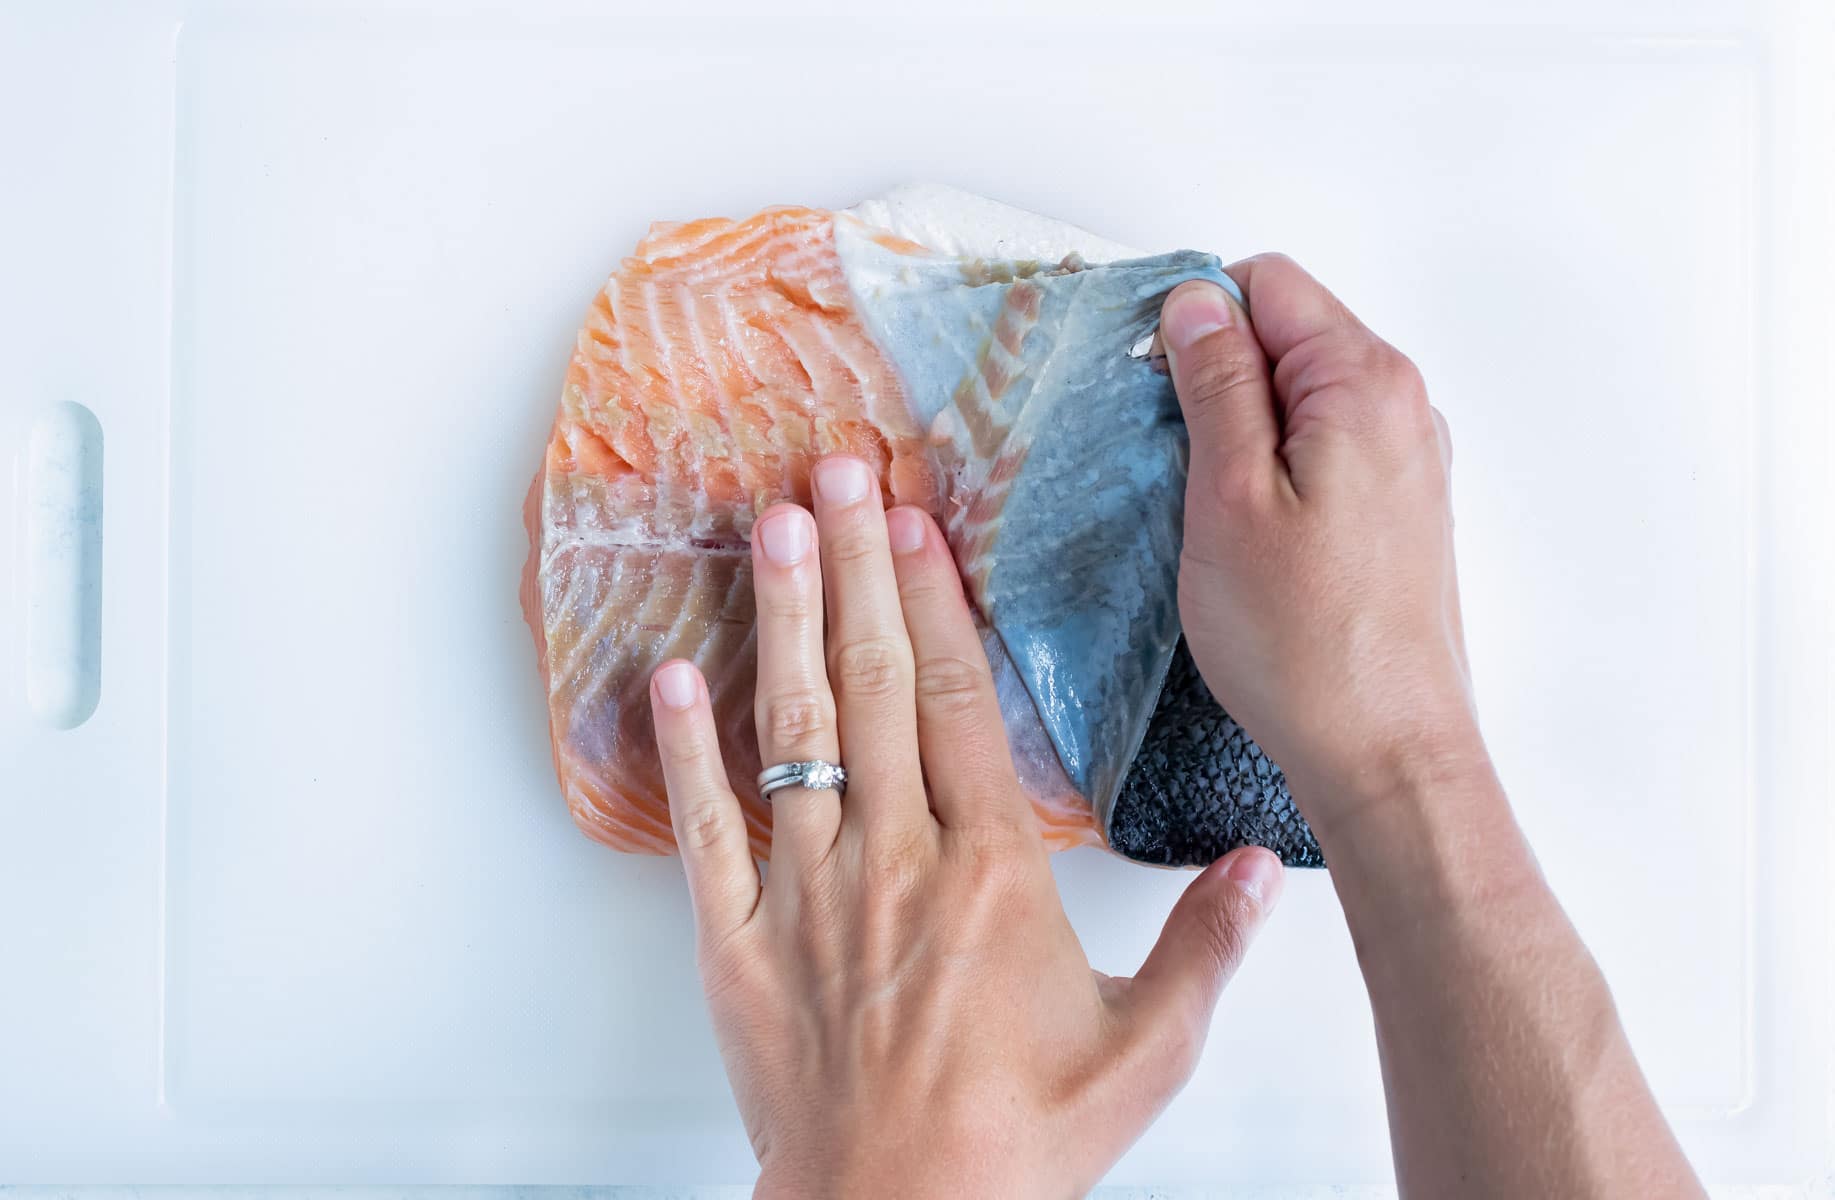 The skin is removed from the fresh salmon.